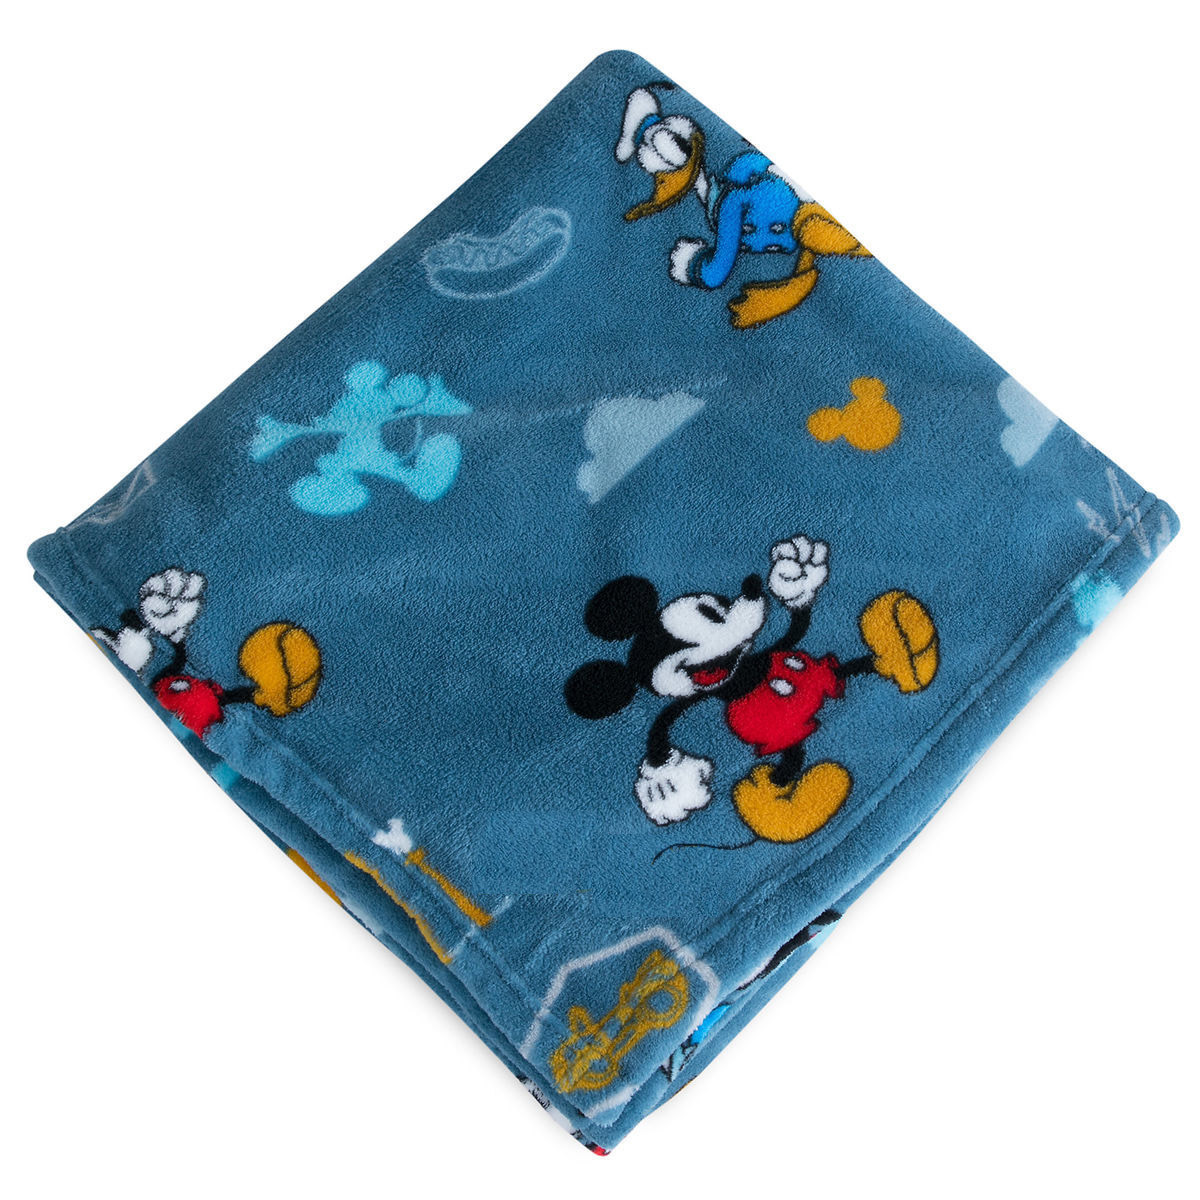 Mickey Mouse, Donald Duck and Pluto Fleece Throw Blanket